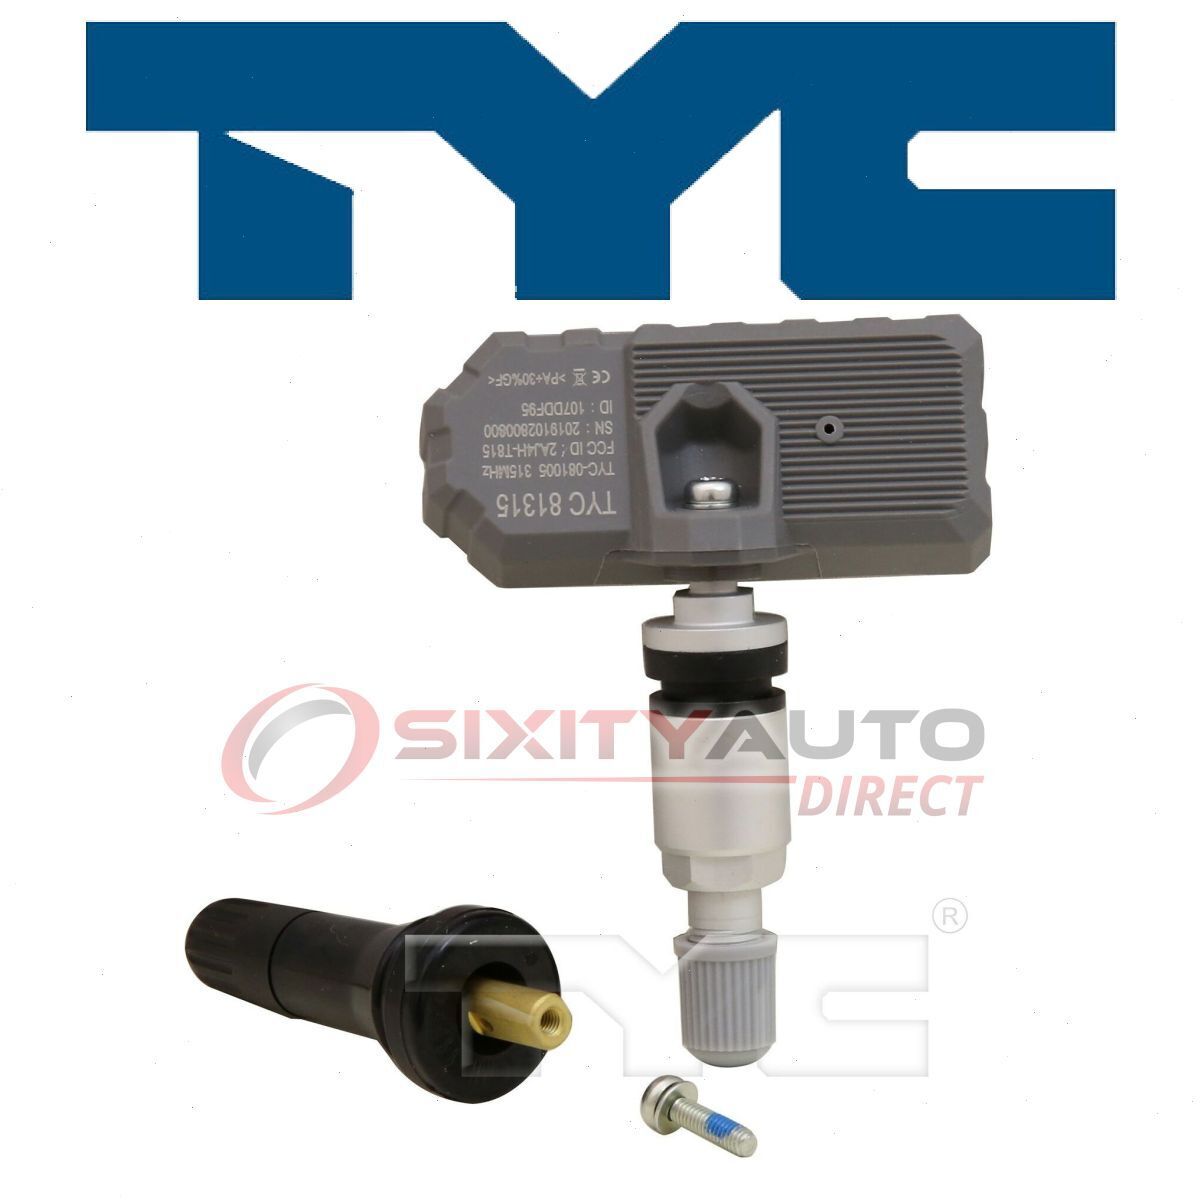 TYC TPMS Programmable Sensor for 1999 BMW 328is Tire Pressure Monitoring jh